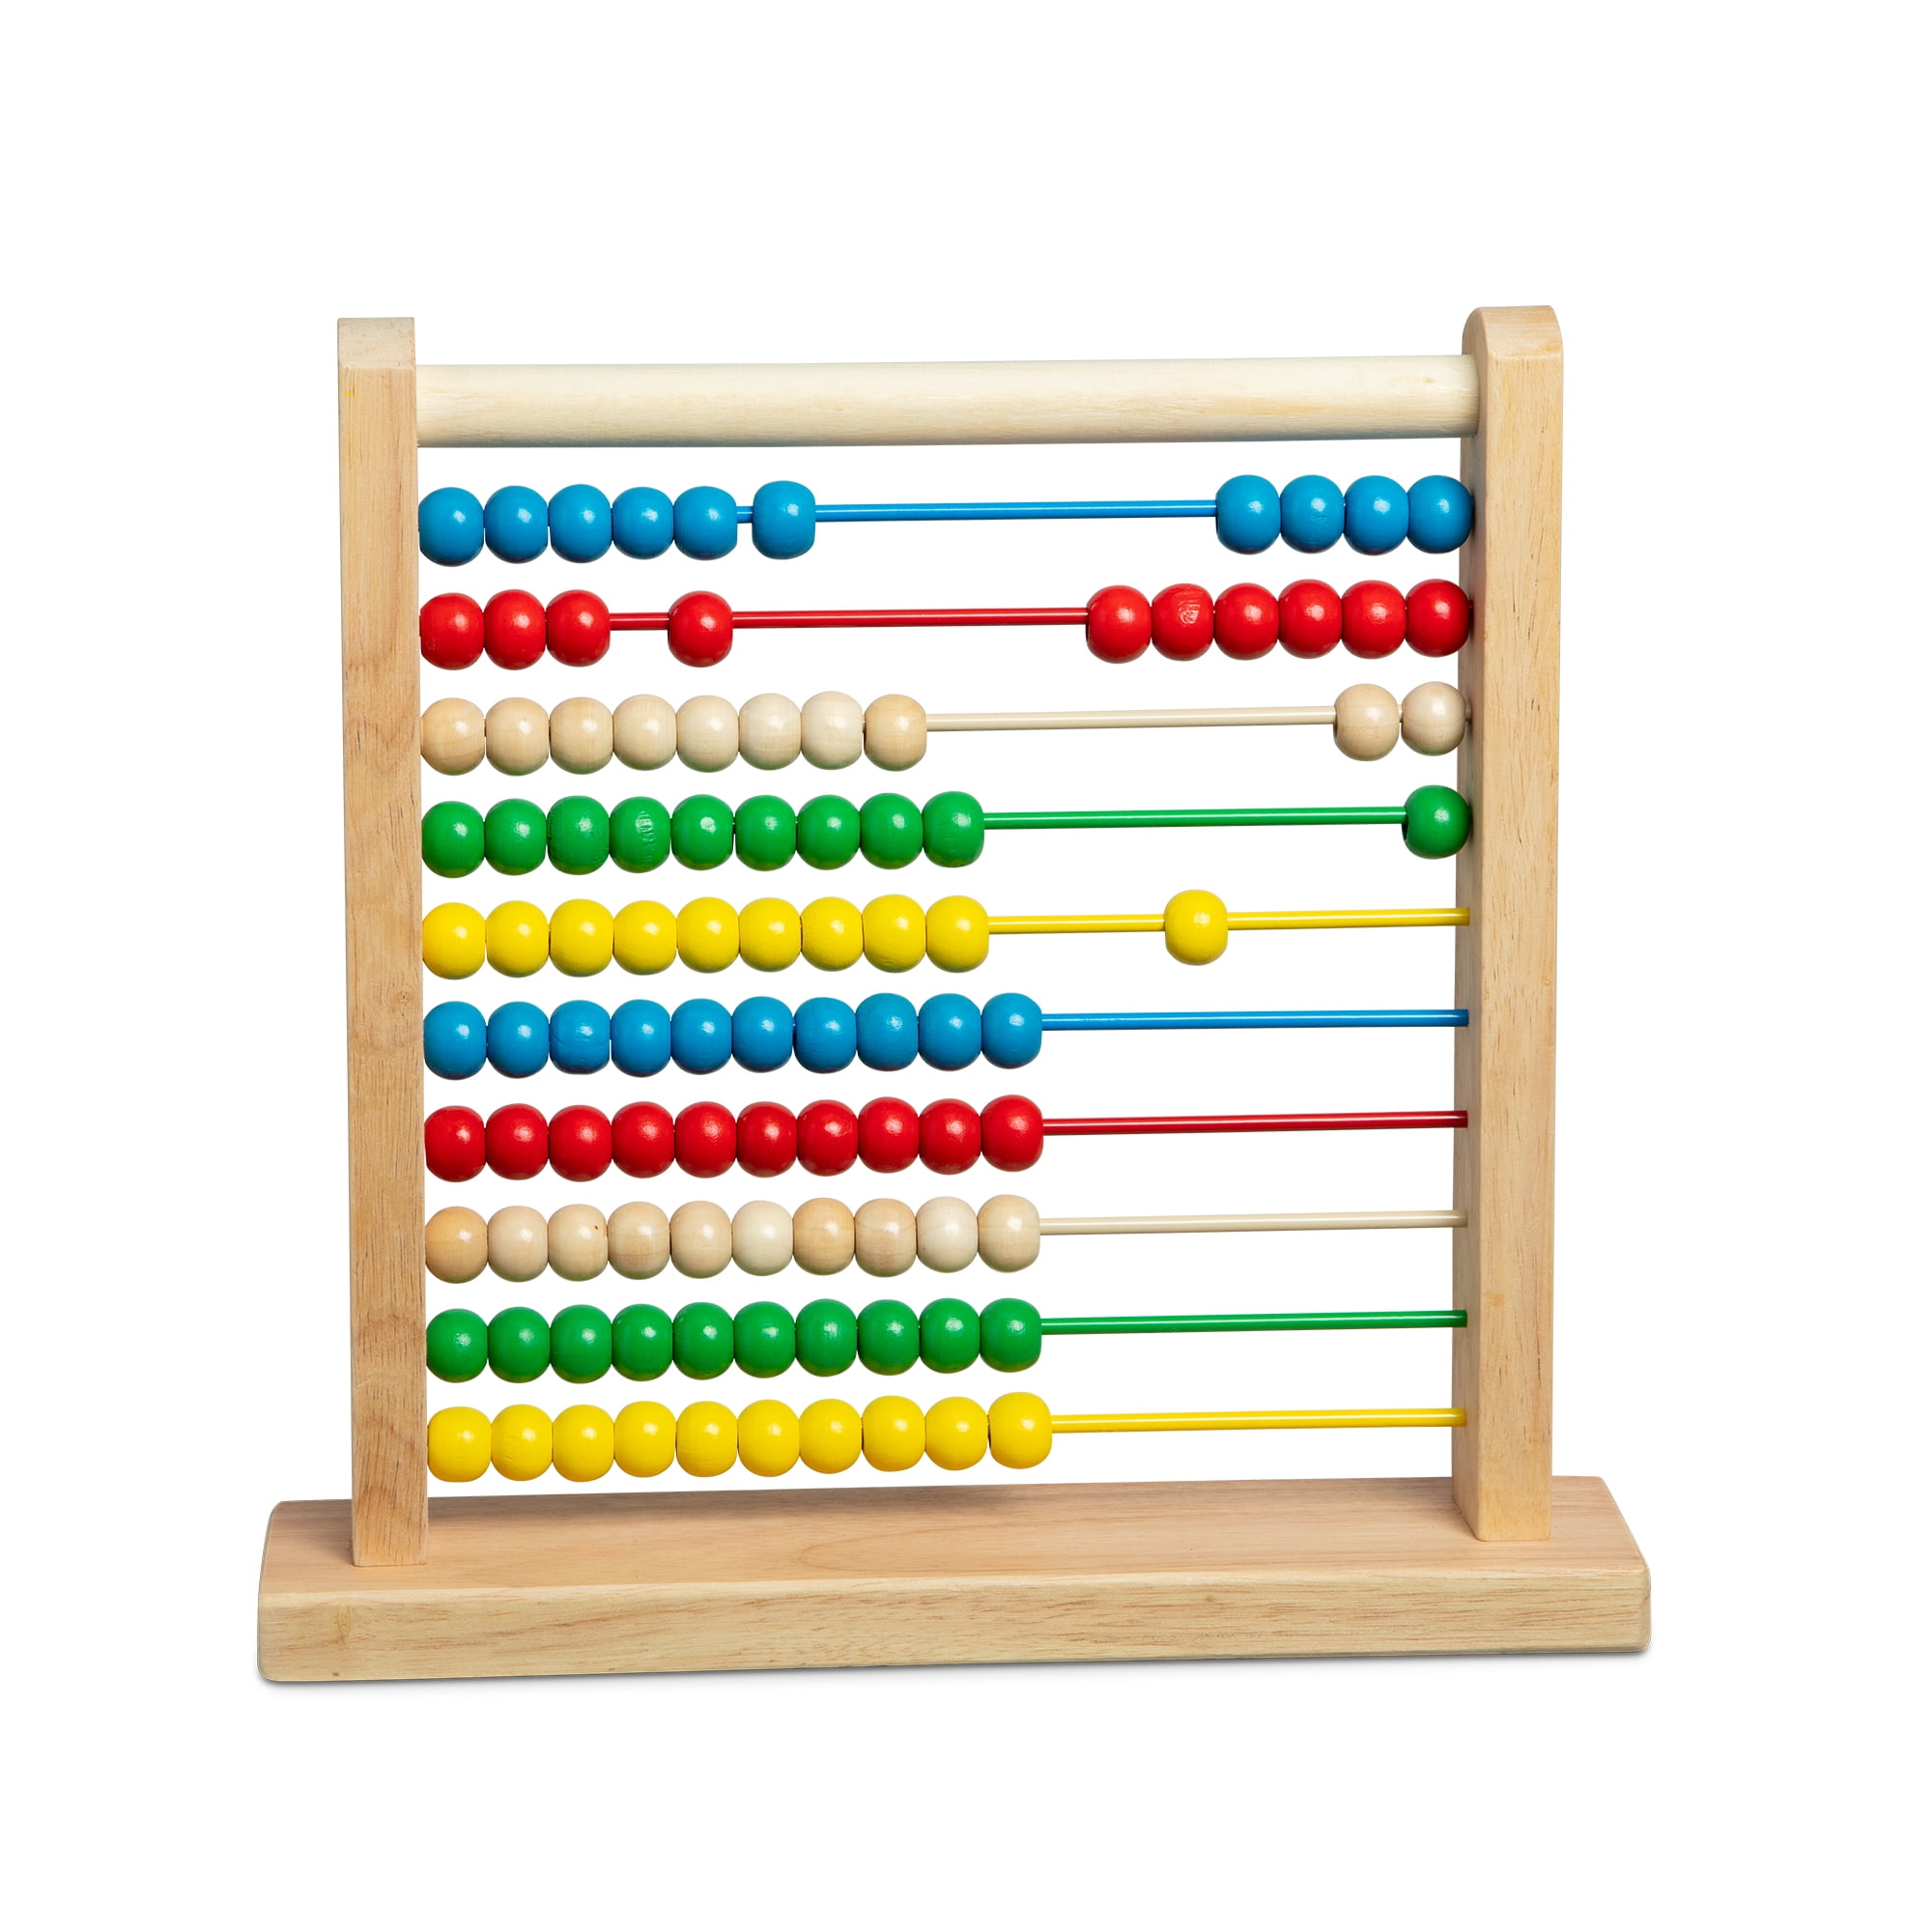 Plastic Abacus Math Toy-Classic Educational Counting Toys For Kids W/ 100 Beads 